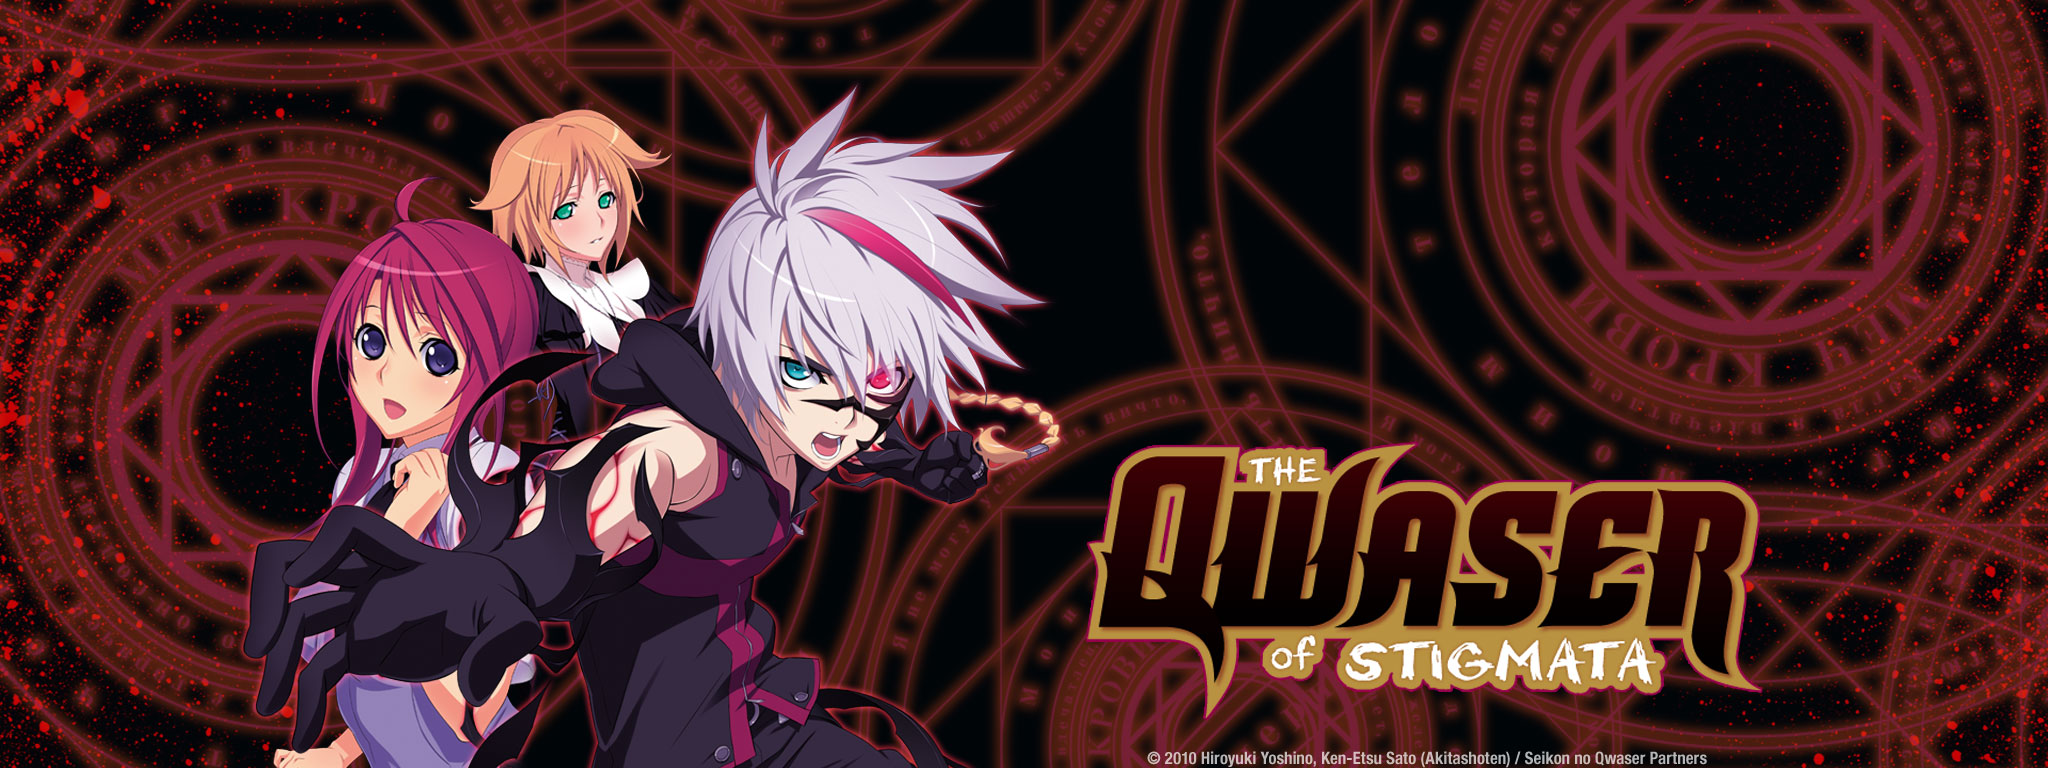 Title Art for The Qwaser of Stigmata